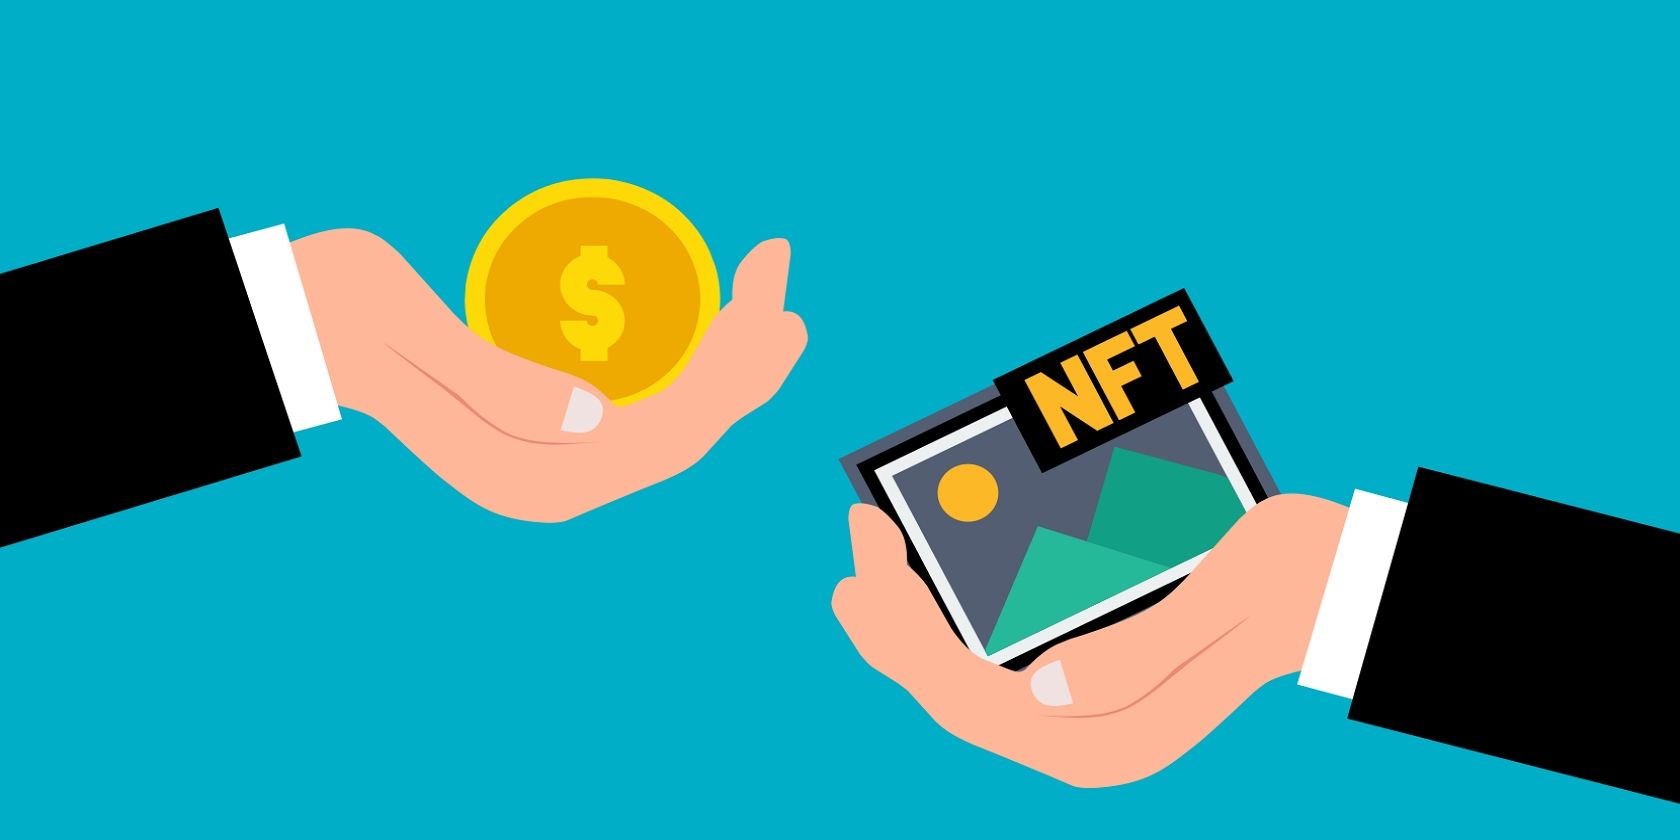 two hands trying to exchange nft and currency